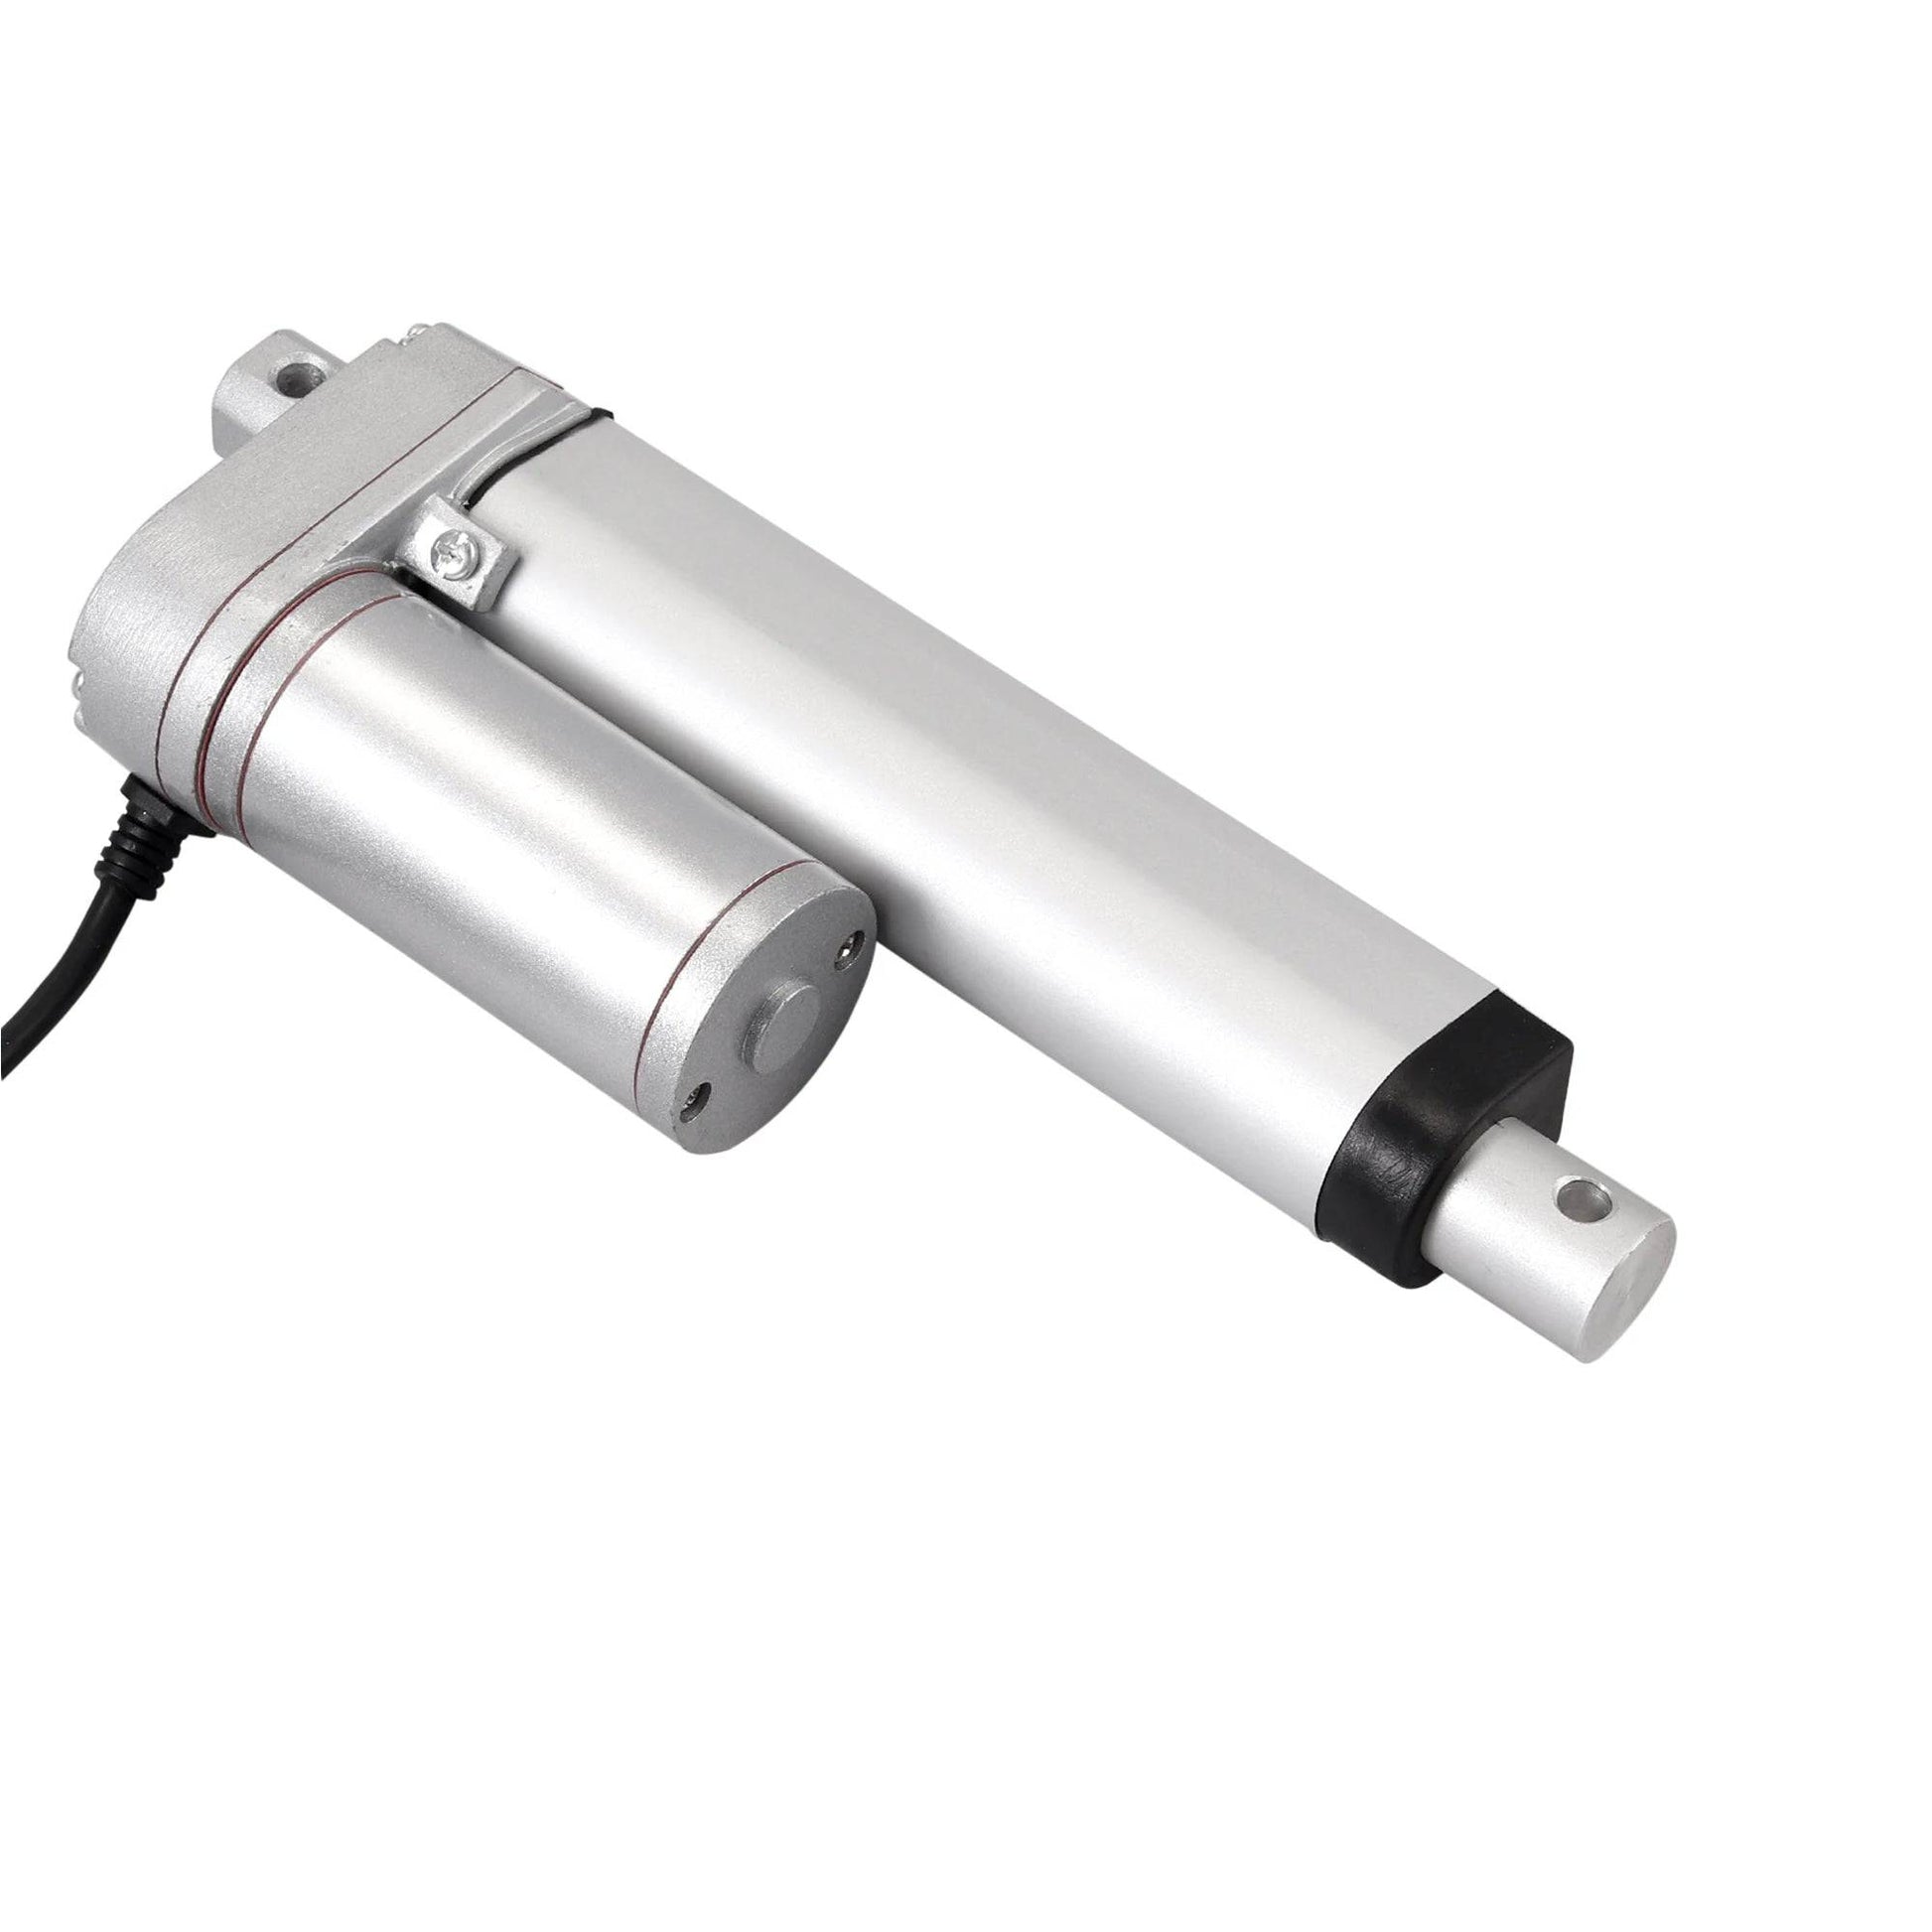 Linear Actuator 12V 100MM Stroke Length Linear Actuator 50MM/S 180N - RS5022 - REES52